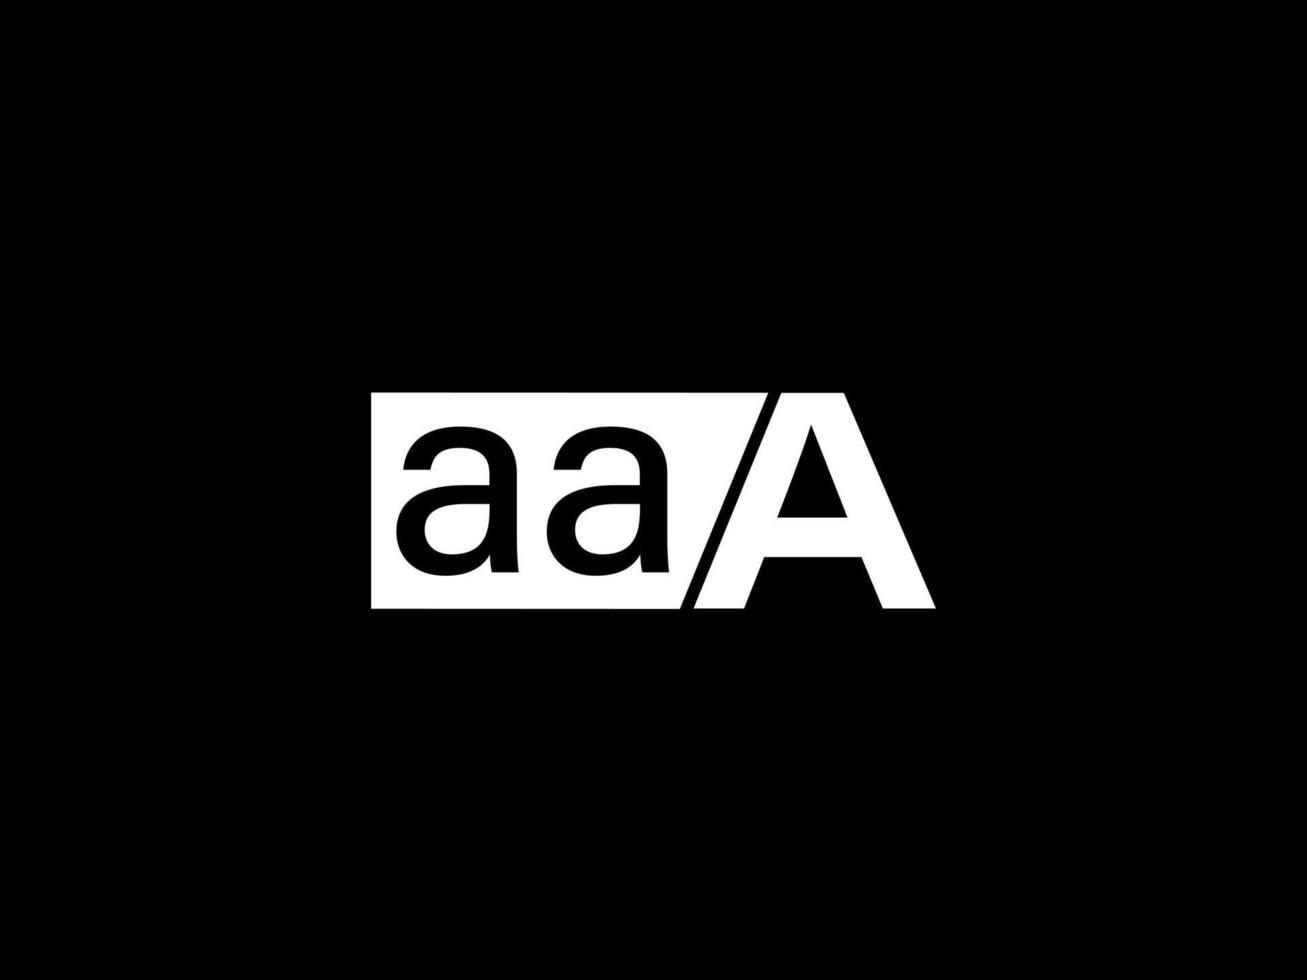 AAA Logo and Graphics design vector art, Icons isolated on black background